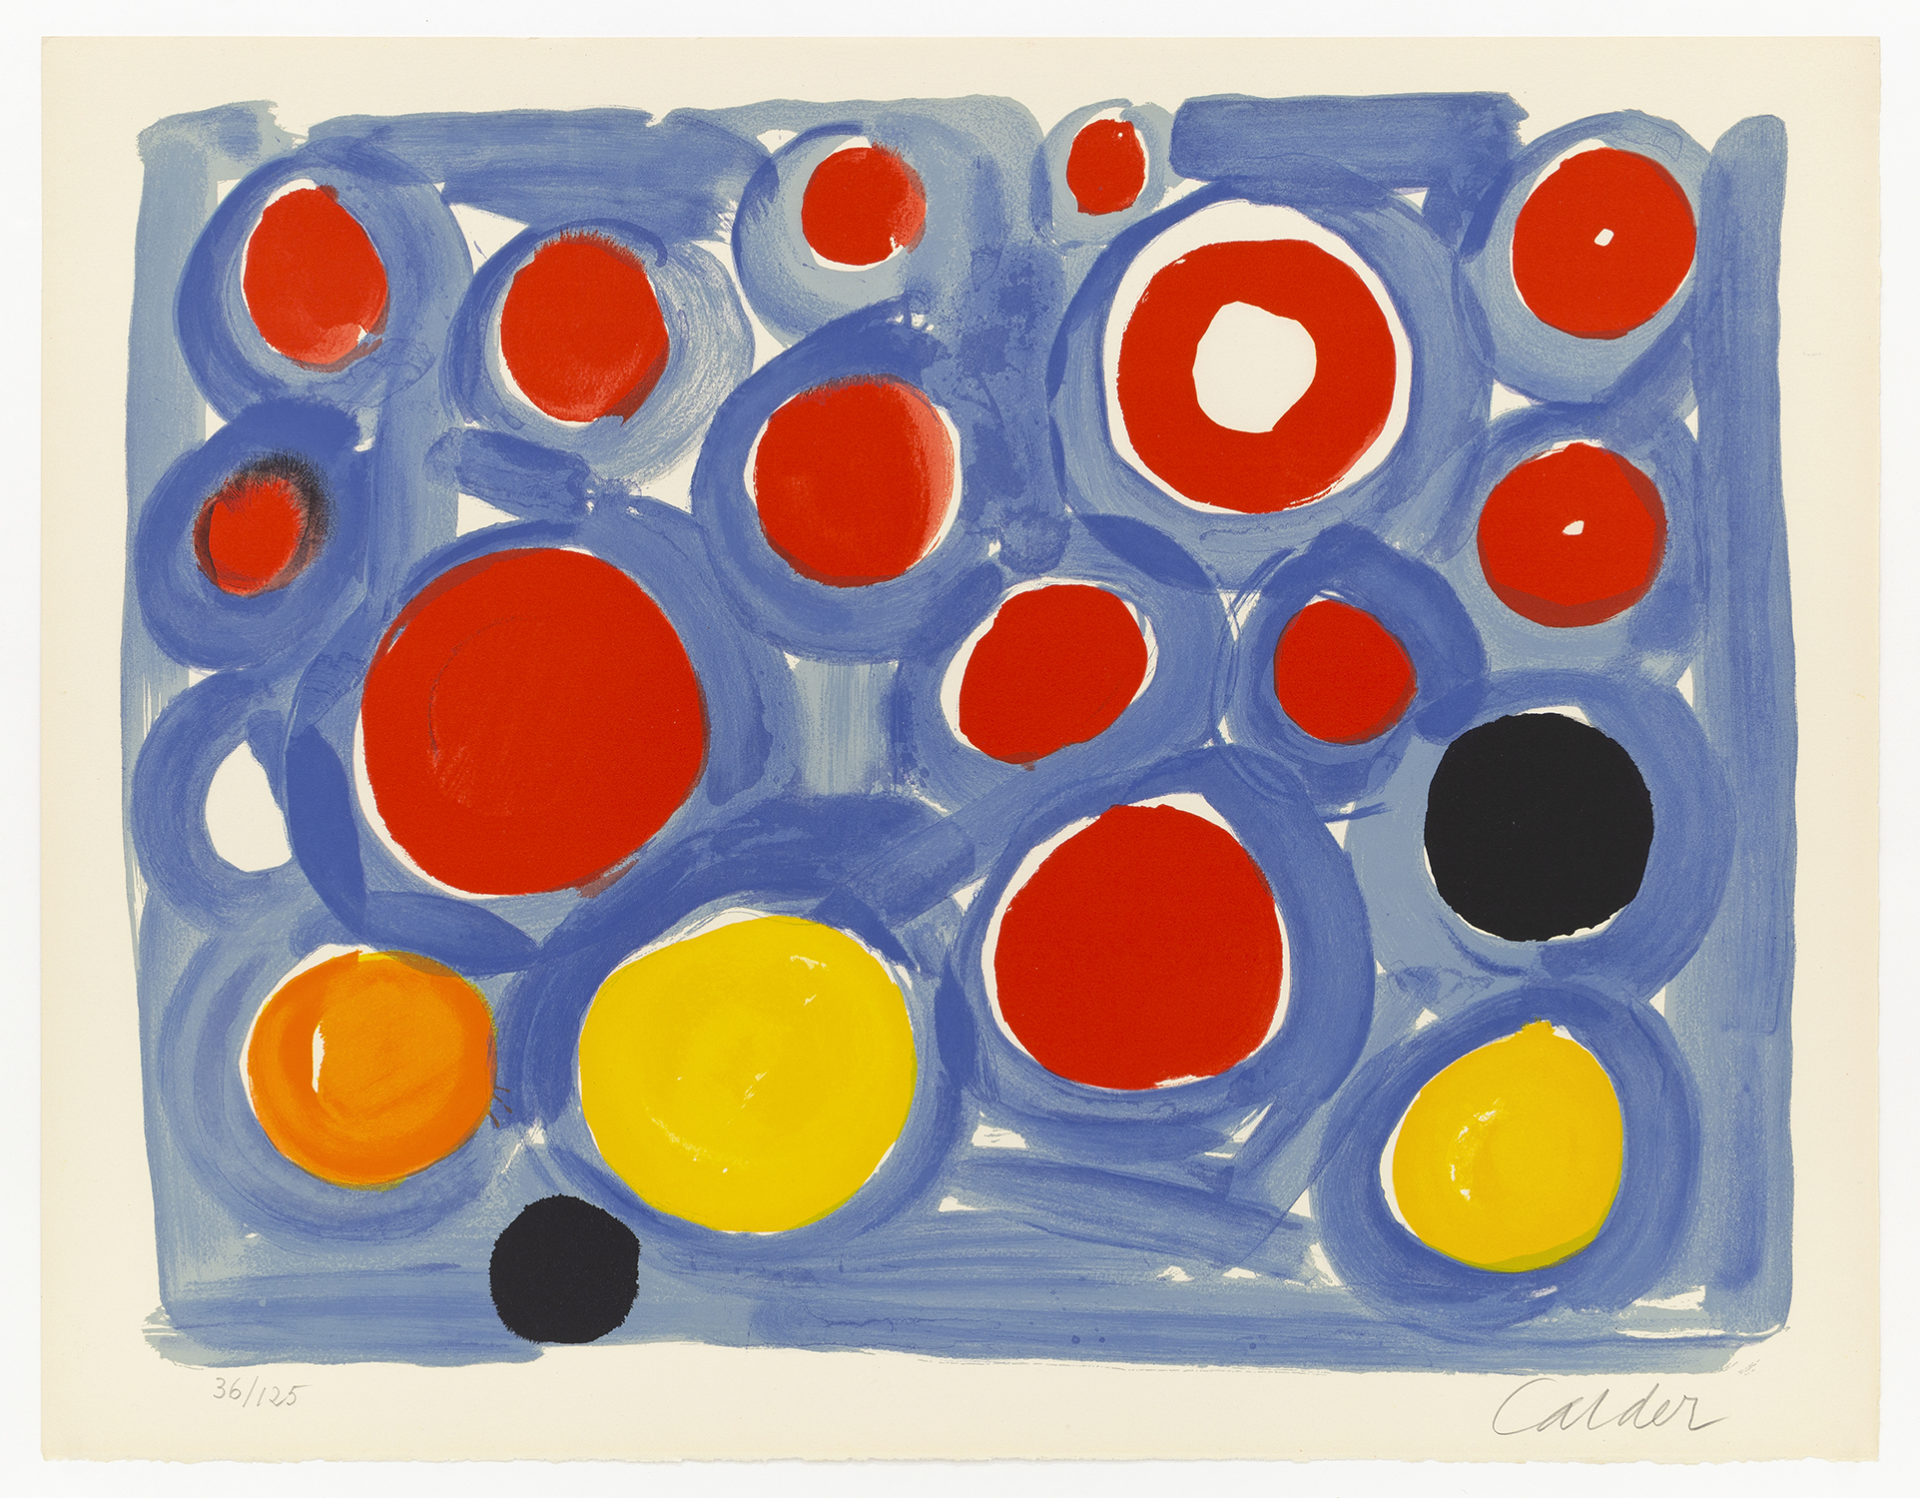 Blue, 1969, Lithograph, 21 3/4 x 28 1/4 inches (55.2 x 71.8 cm), Edition of 125